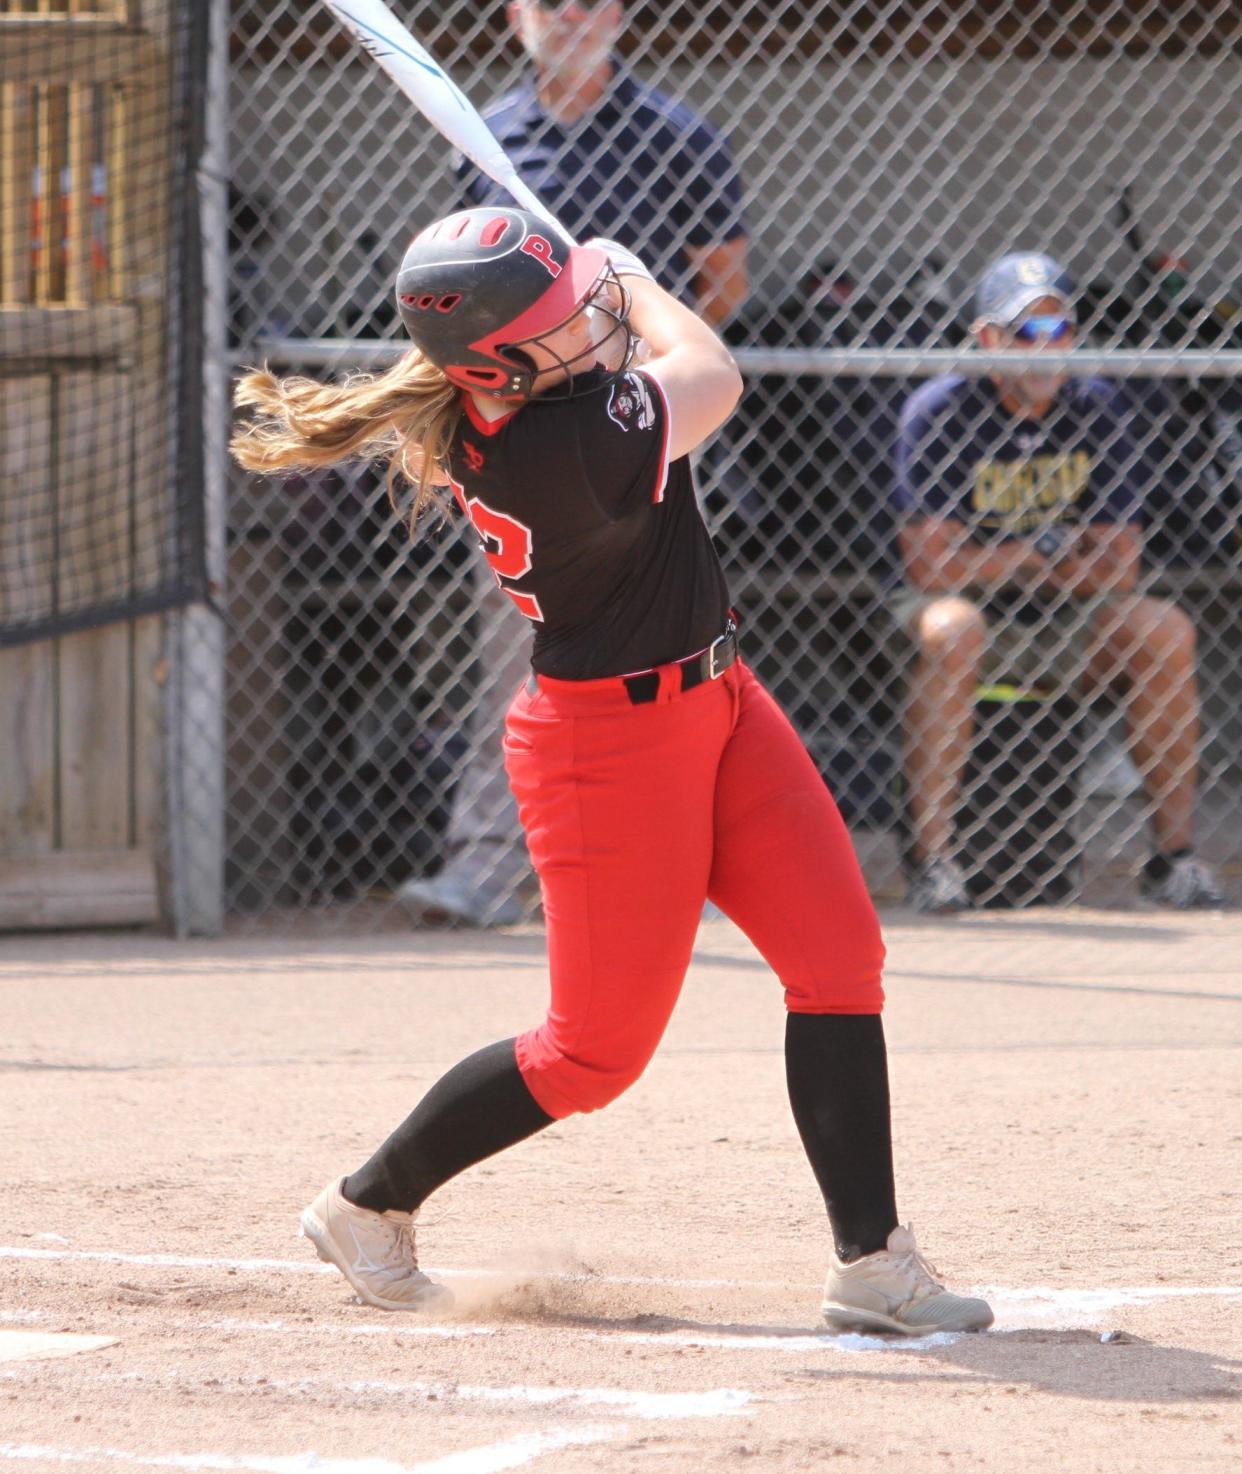 Mackenzie Burns of Pinckney leads Livingston County in batting average, home runs, runs batted in and doubles.